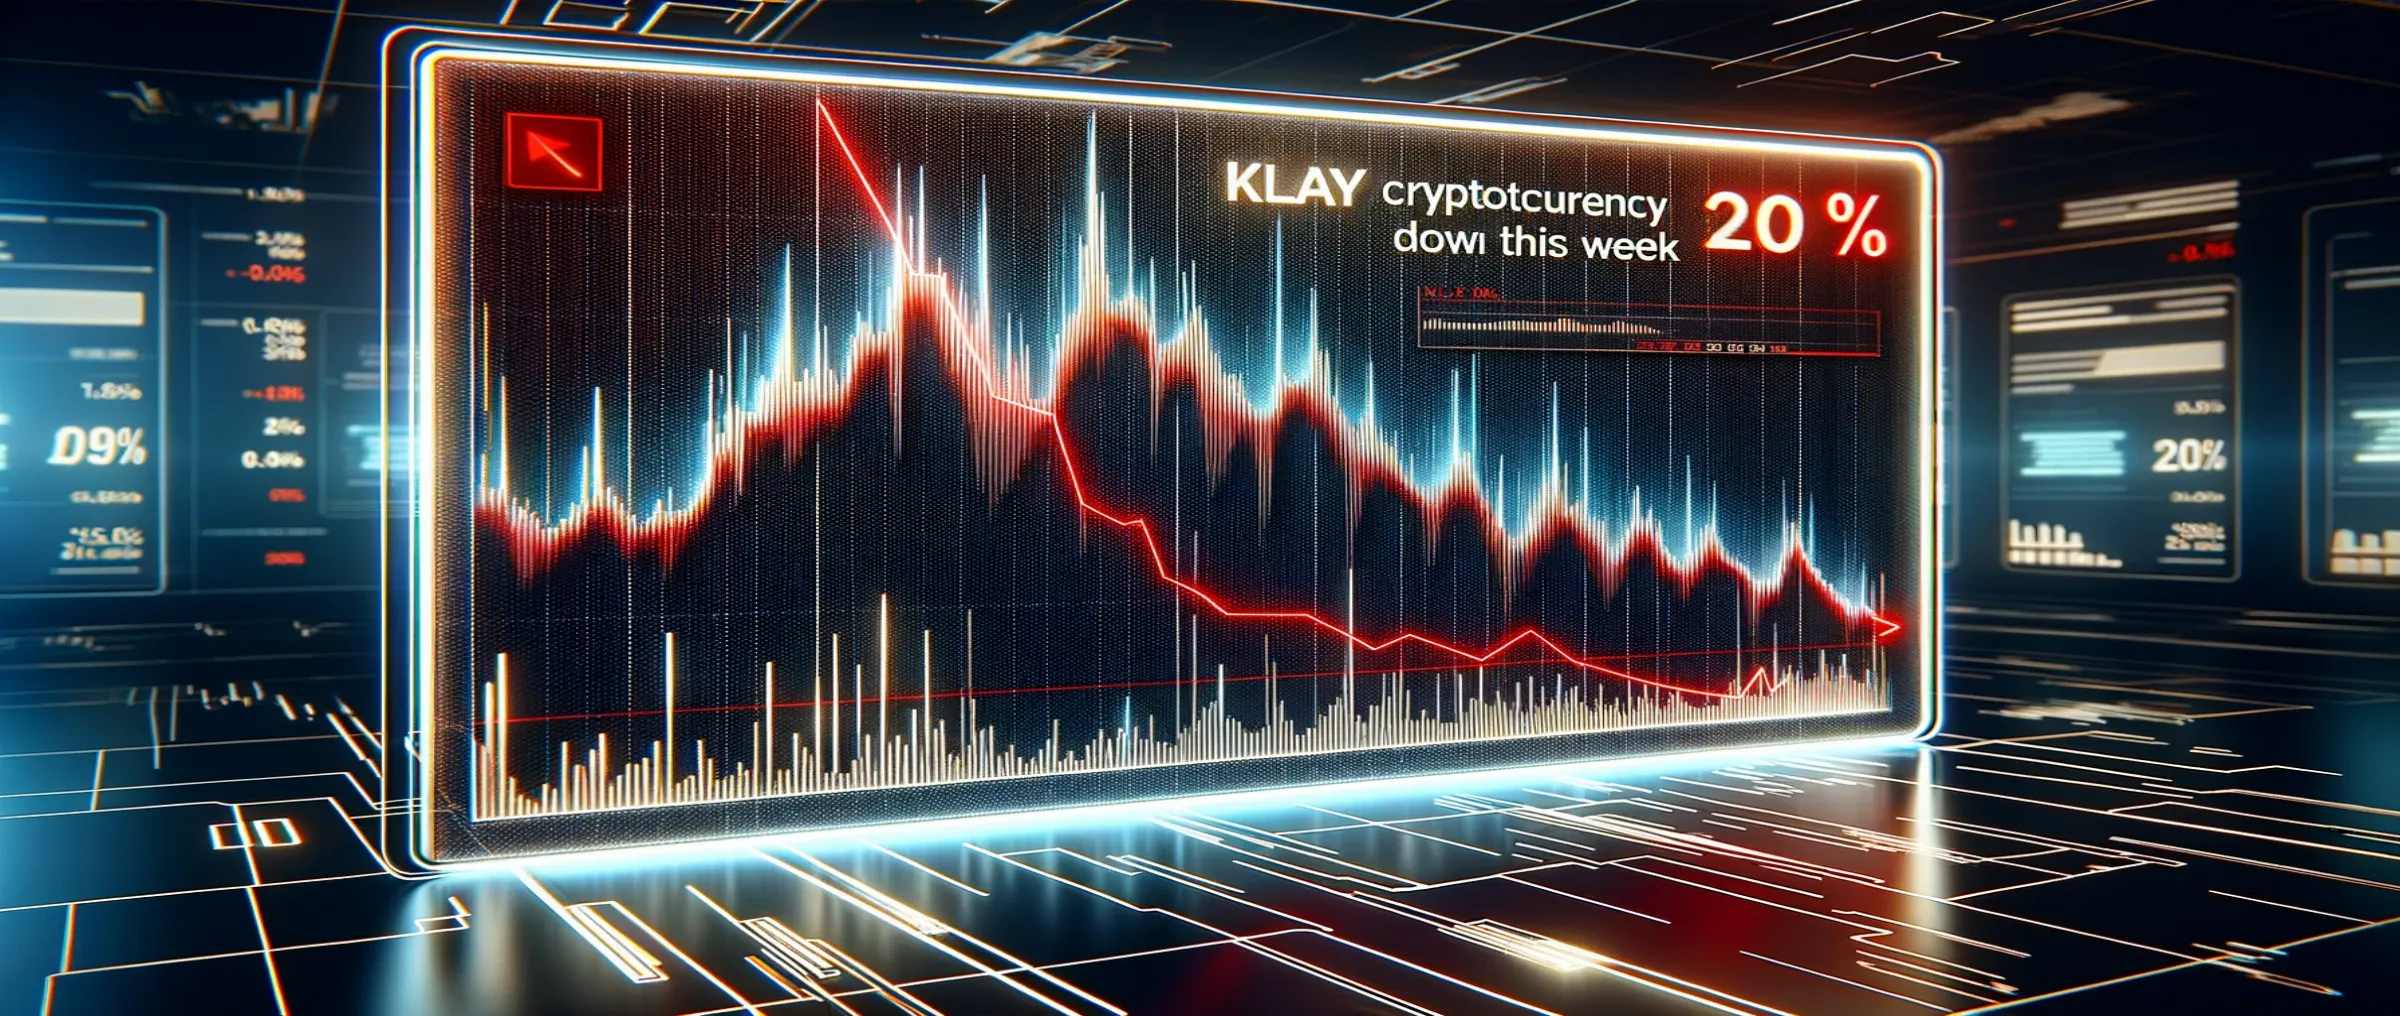 The exchange rate of the KLAY cryptocurrency has fallen by 20% in a week